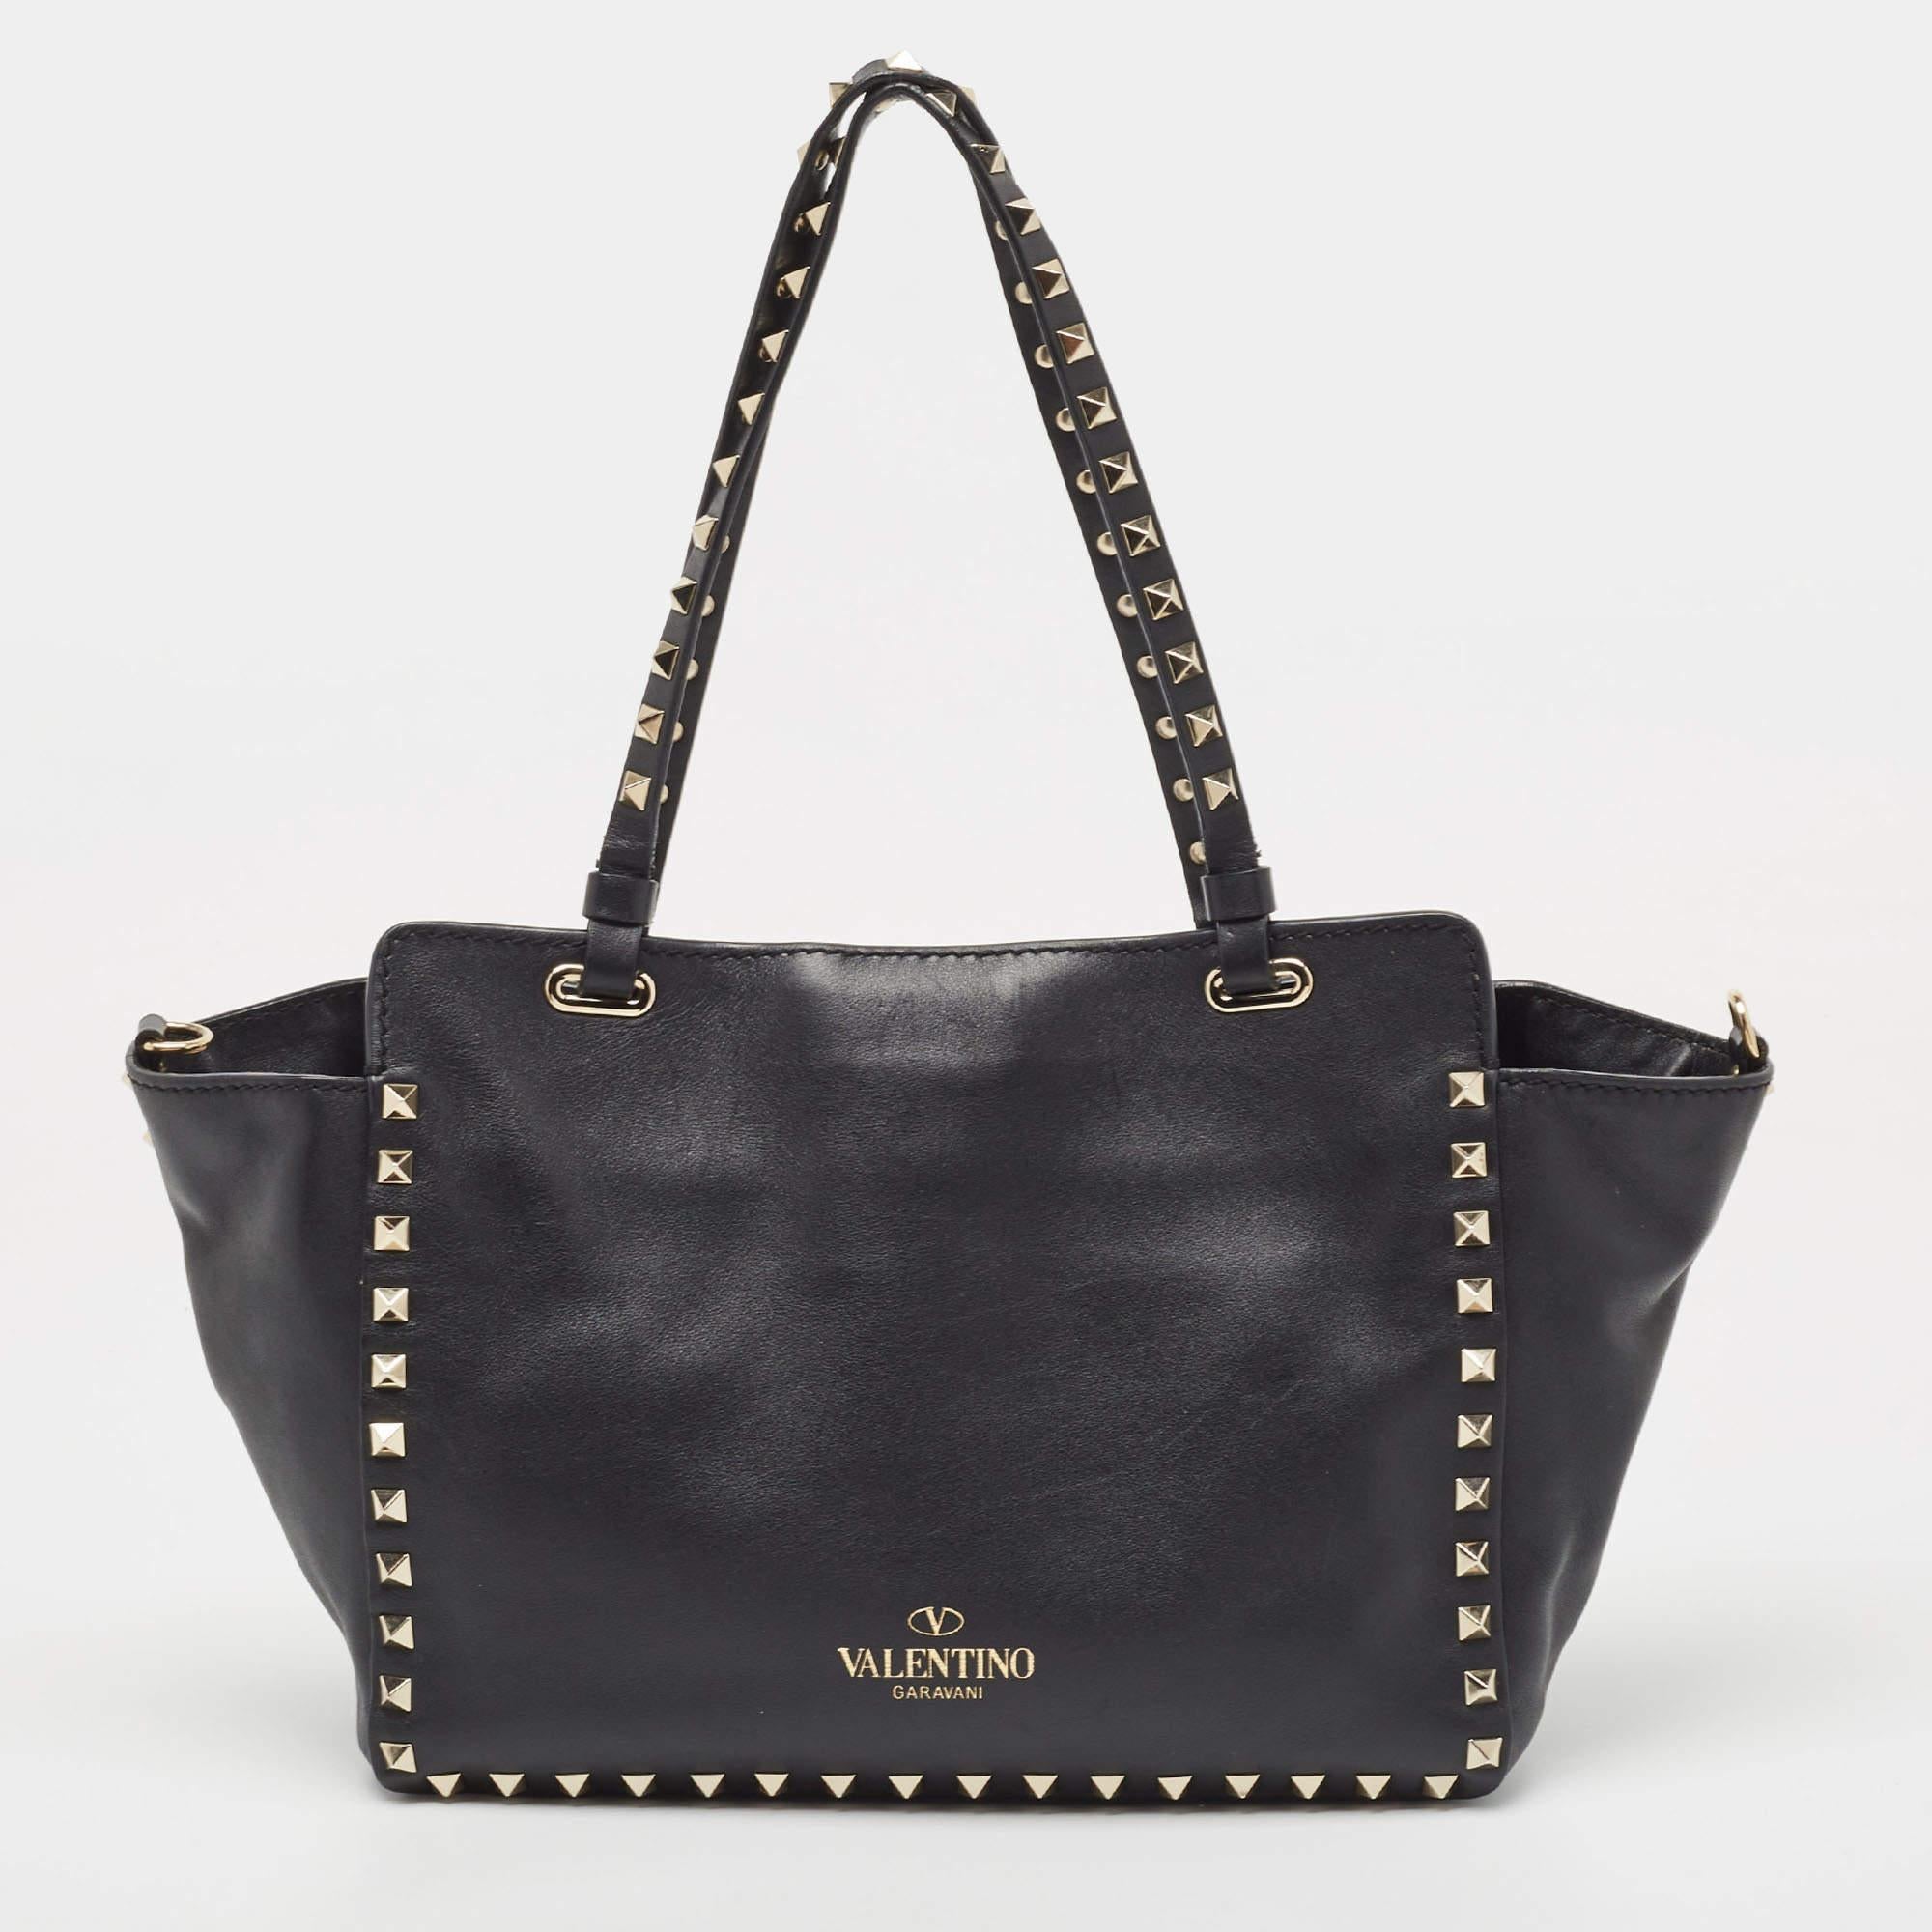 This alluring tote bag for women has been designed to assist you on any day. Convenient to carry and fashionably designed, the tote is cut with skill and sewn into a great shape. It is well-equipped to be a reliable accessory.

Includes: Detachable